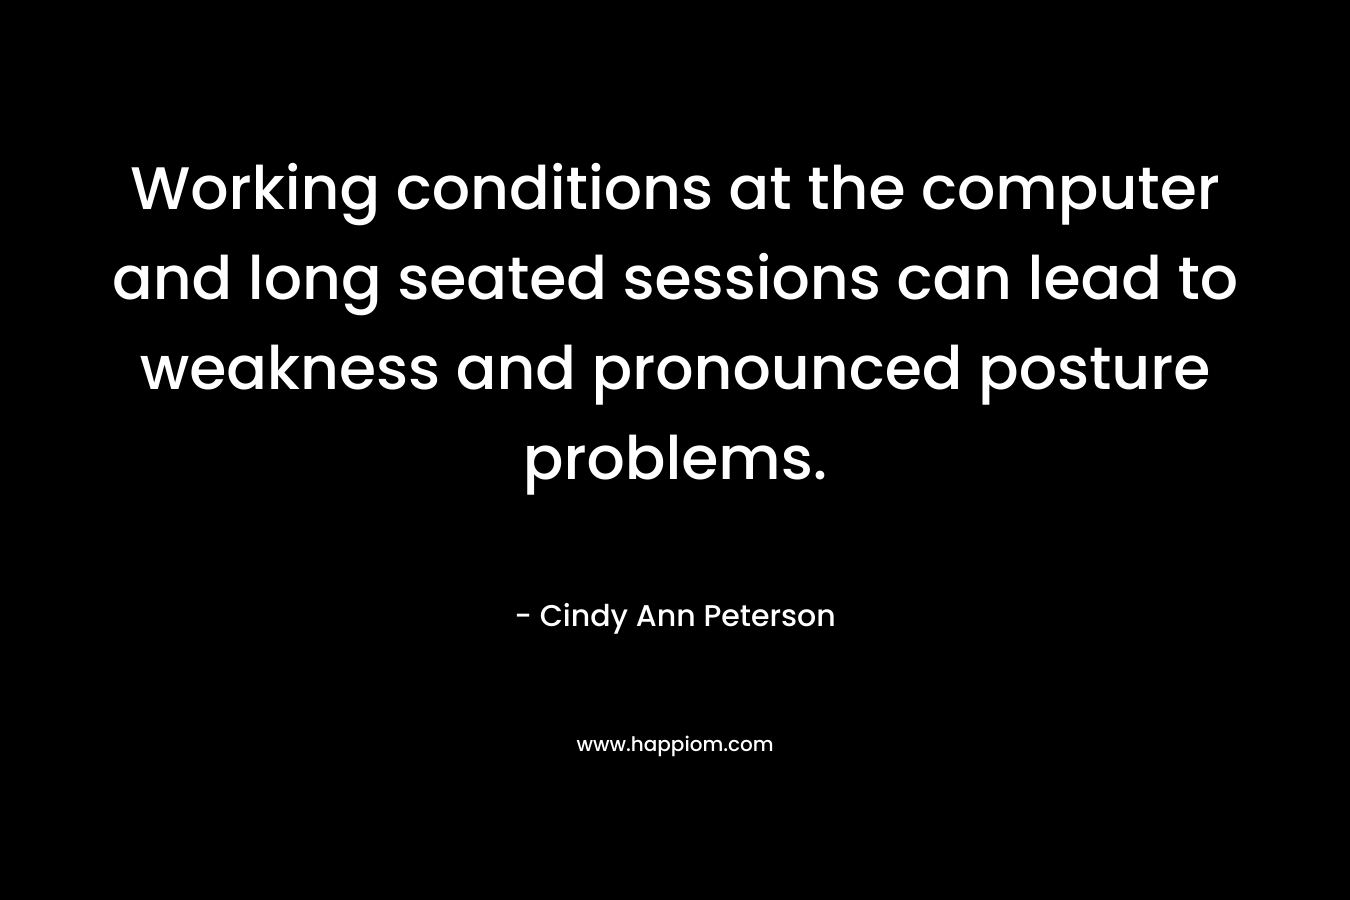 Working conditions at the computer and long seated sessions can lead to weakness and pronounced posture problems.